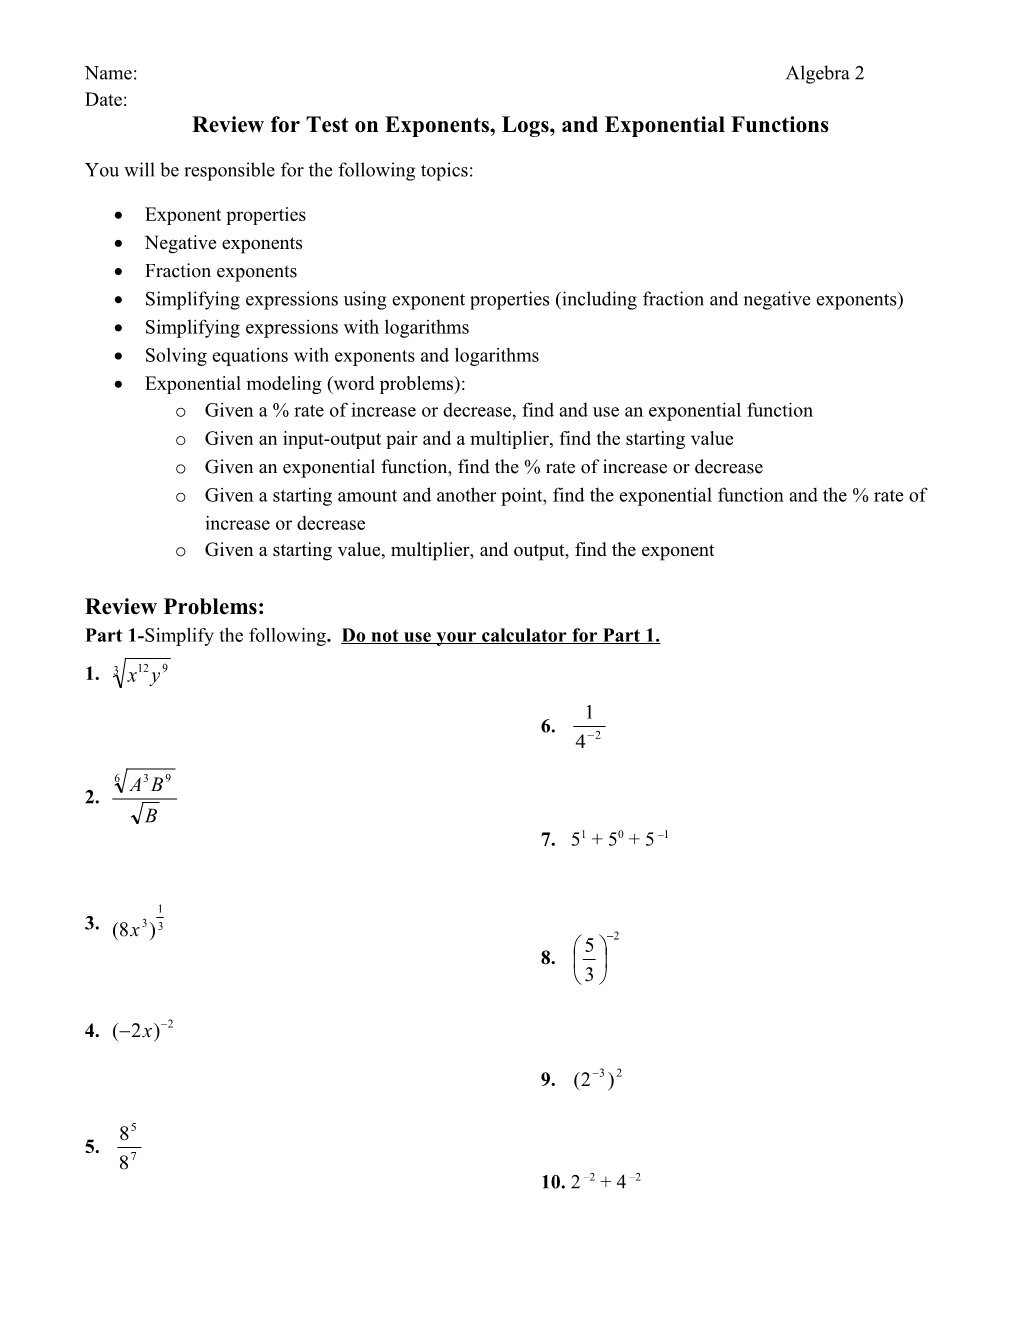 Review Problems For Test On Exponents And Exponential Functions: